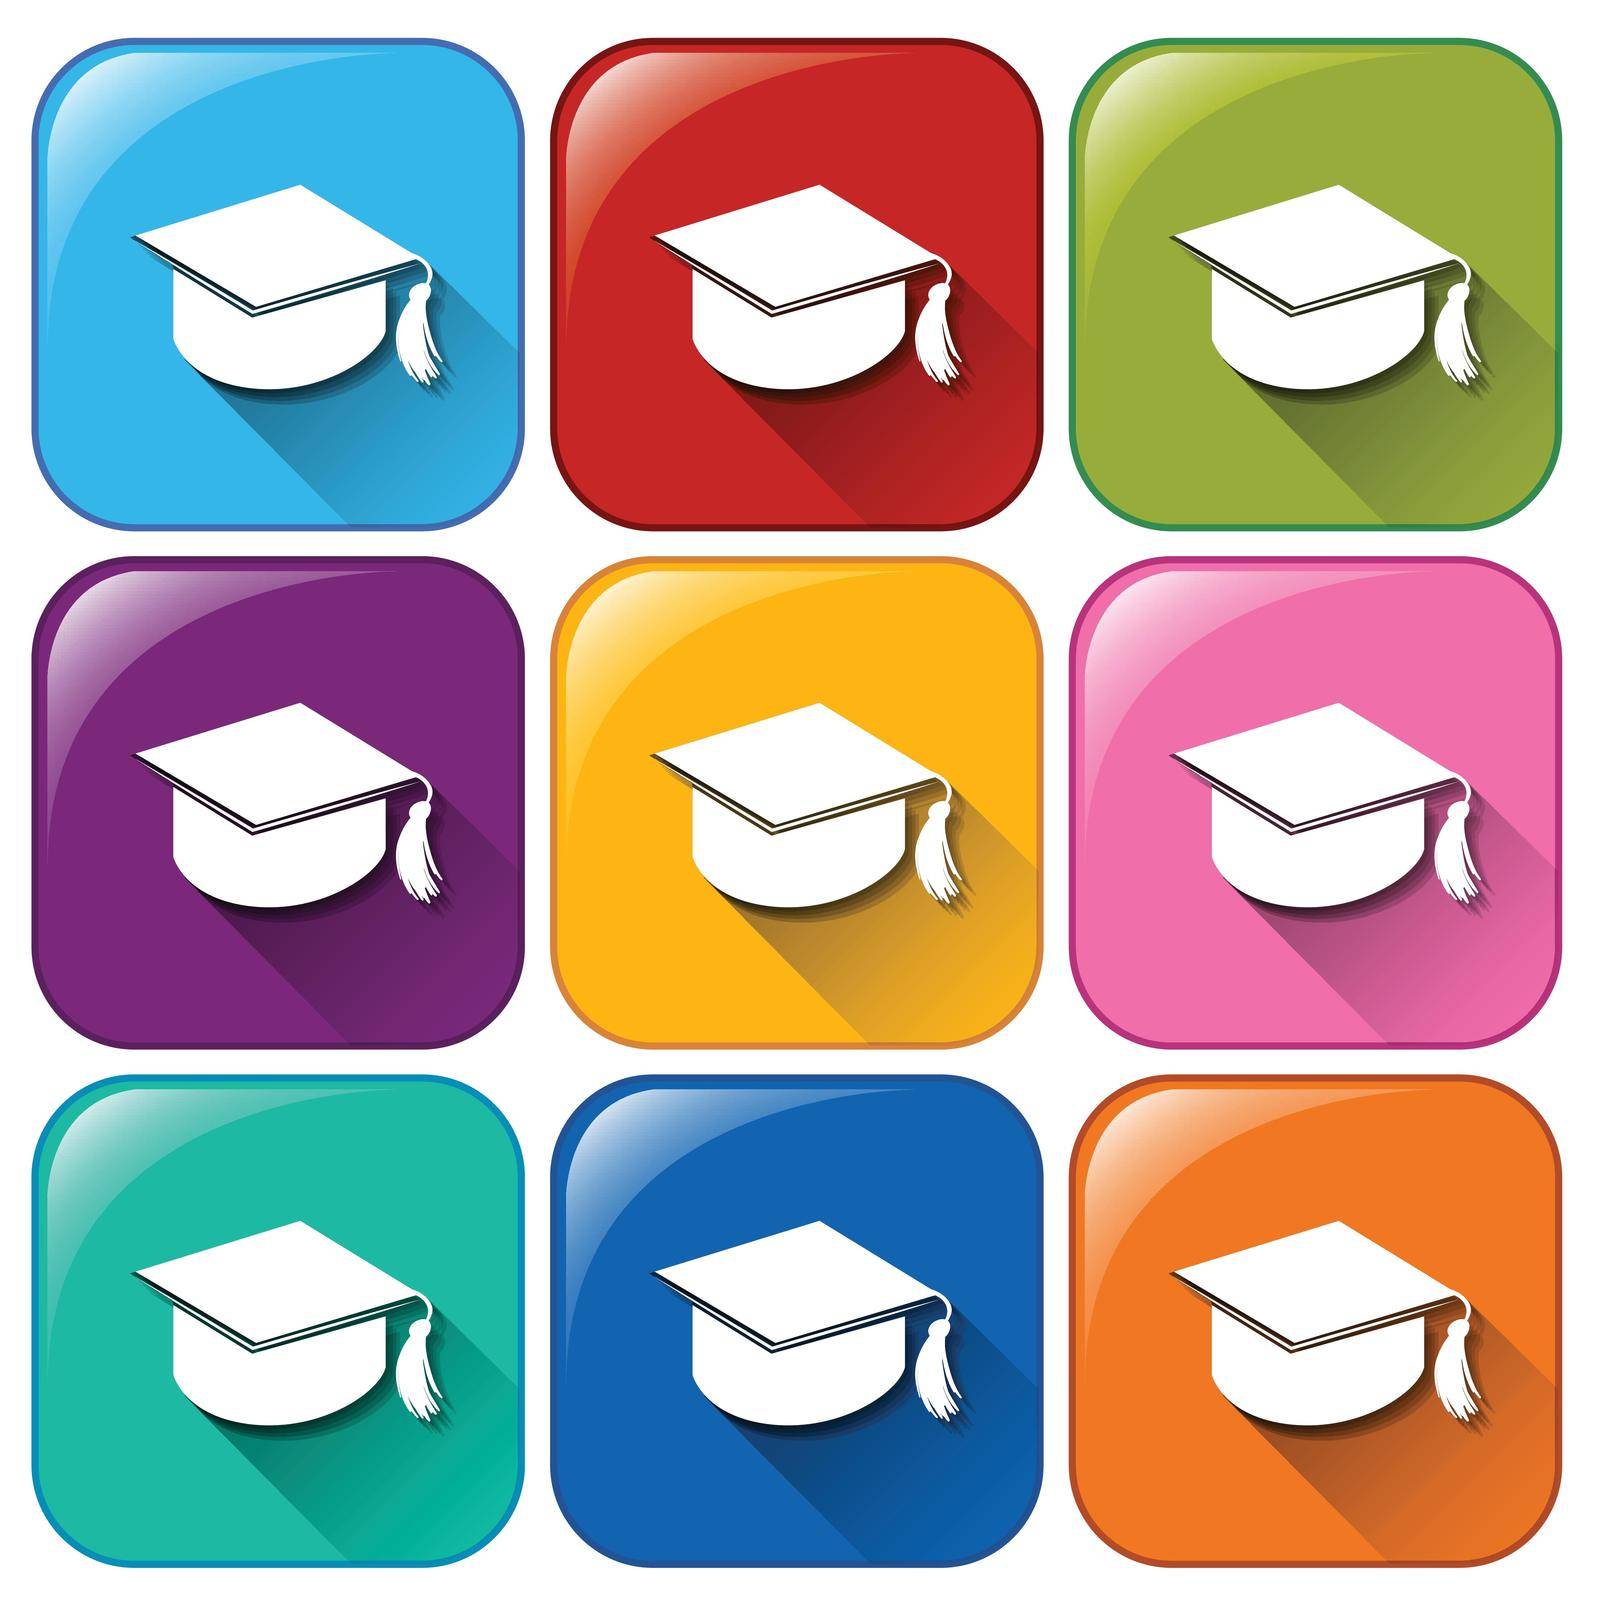 Illustration of the graduation icons on a white background